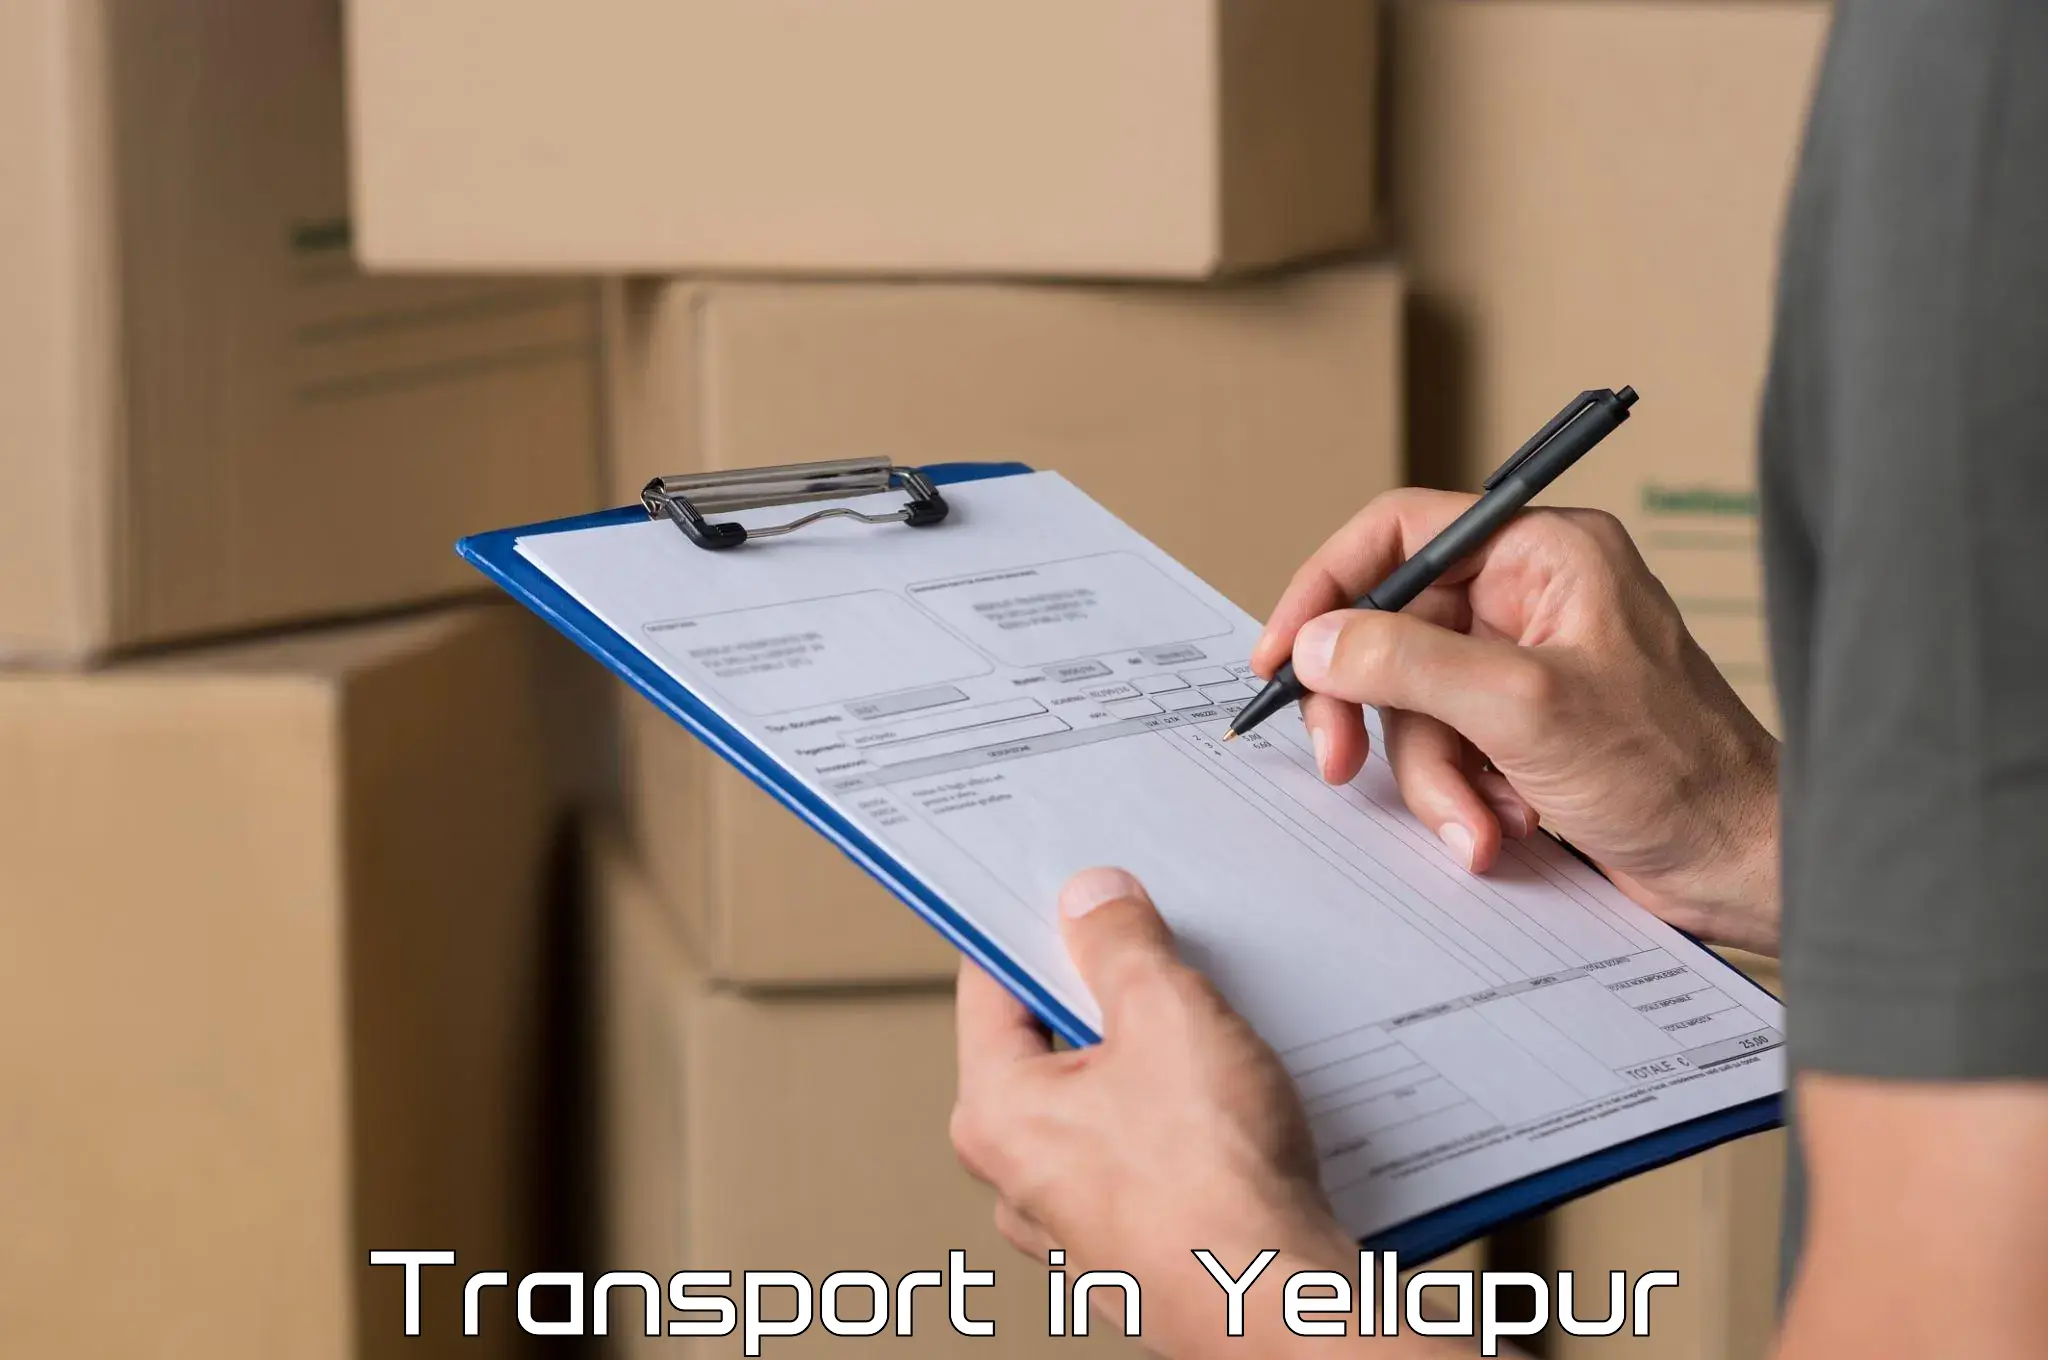 Delivery service in Yellapur